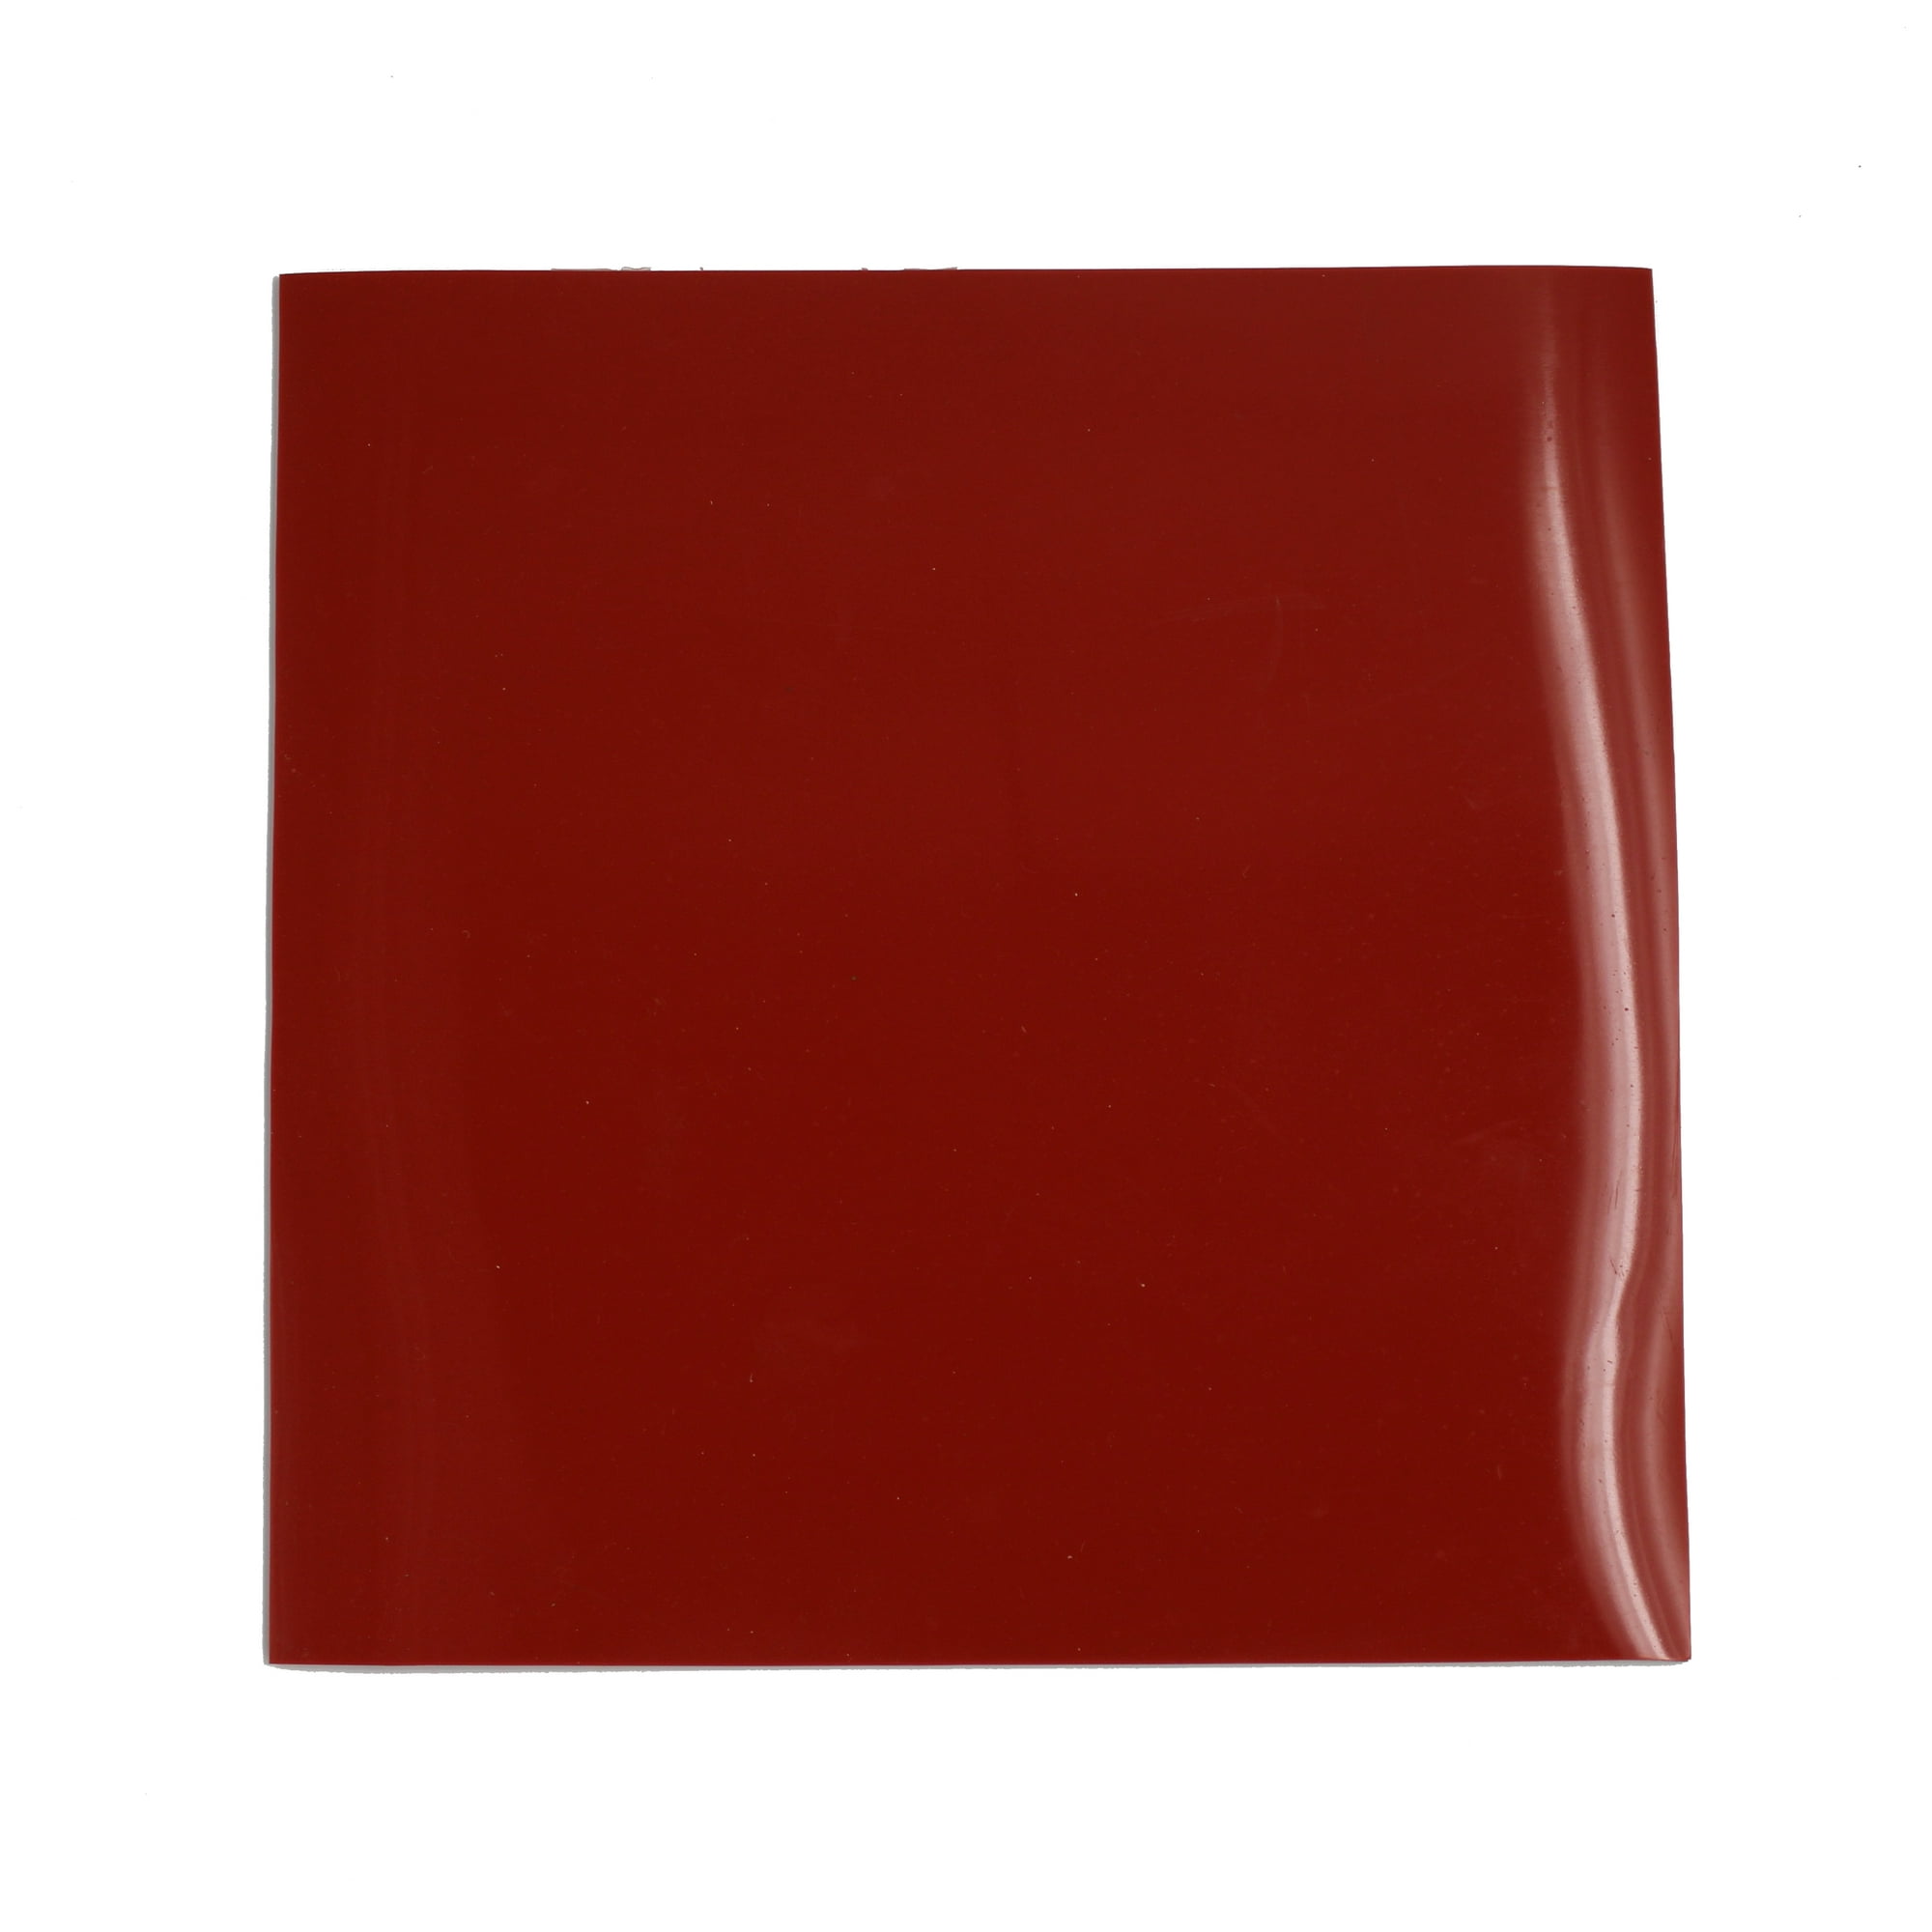 Red Silicone Sheet Fireproof Gasket Material for Auto Replacement Universal Vehicle 2pcs - Paidu Suppliers